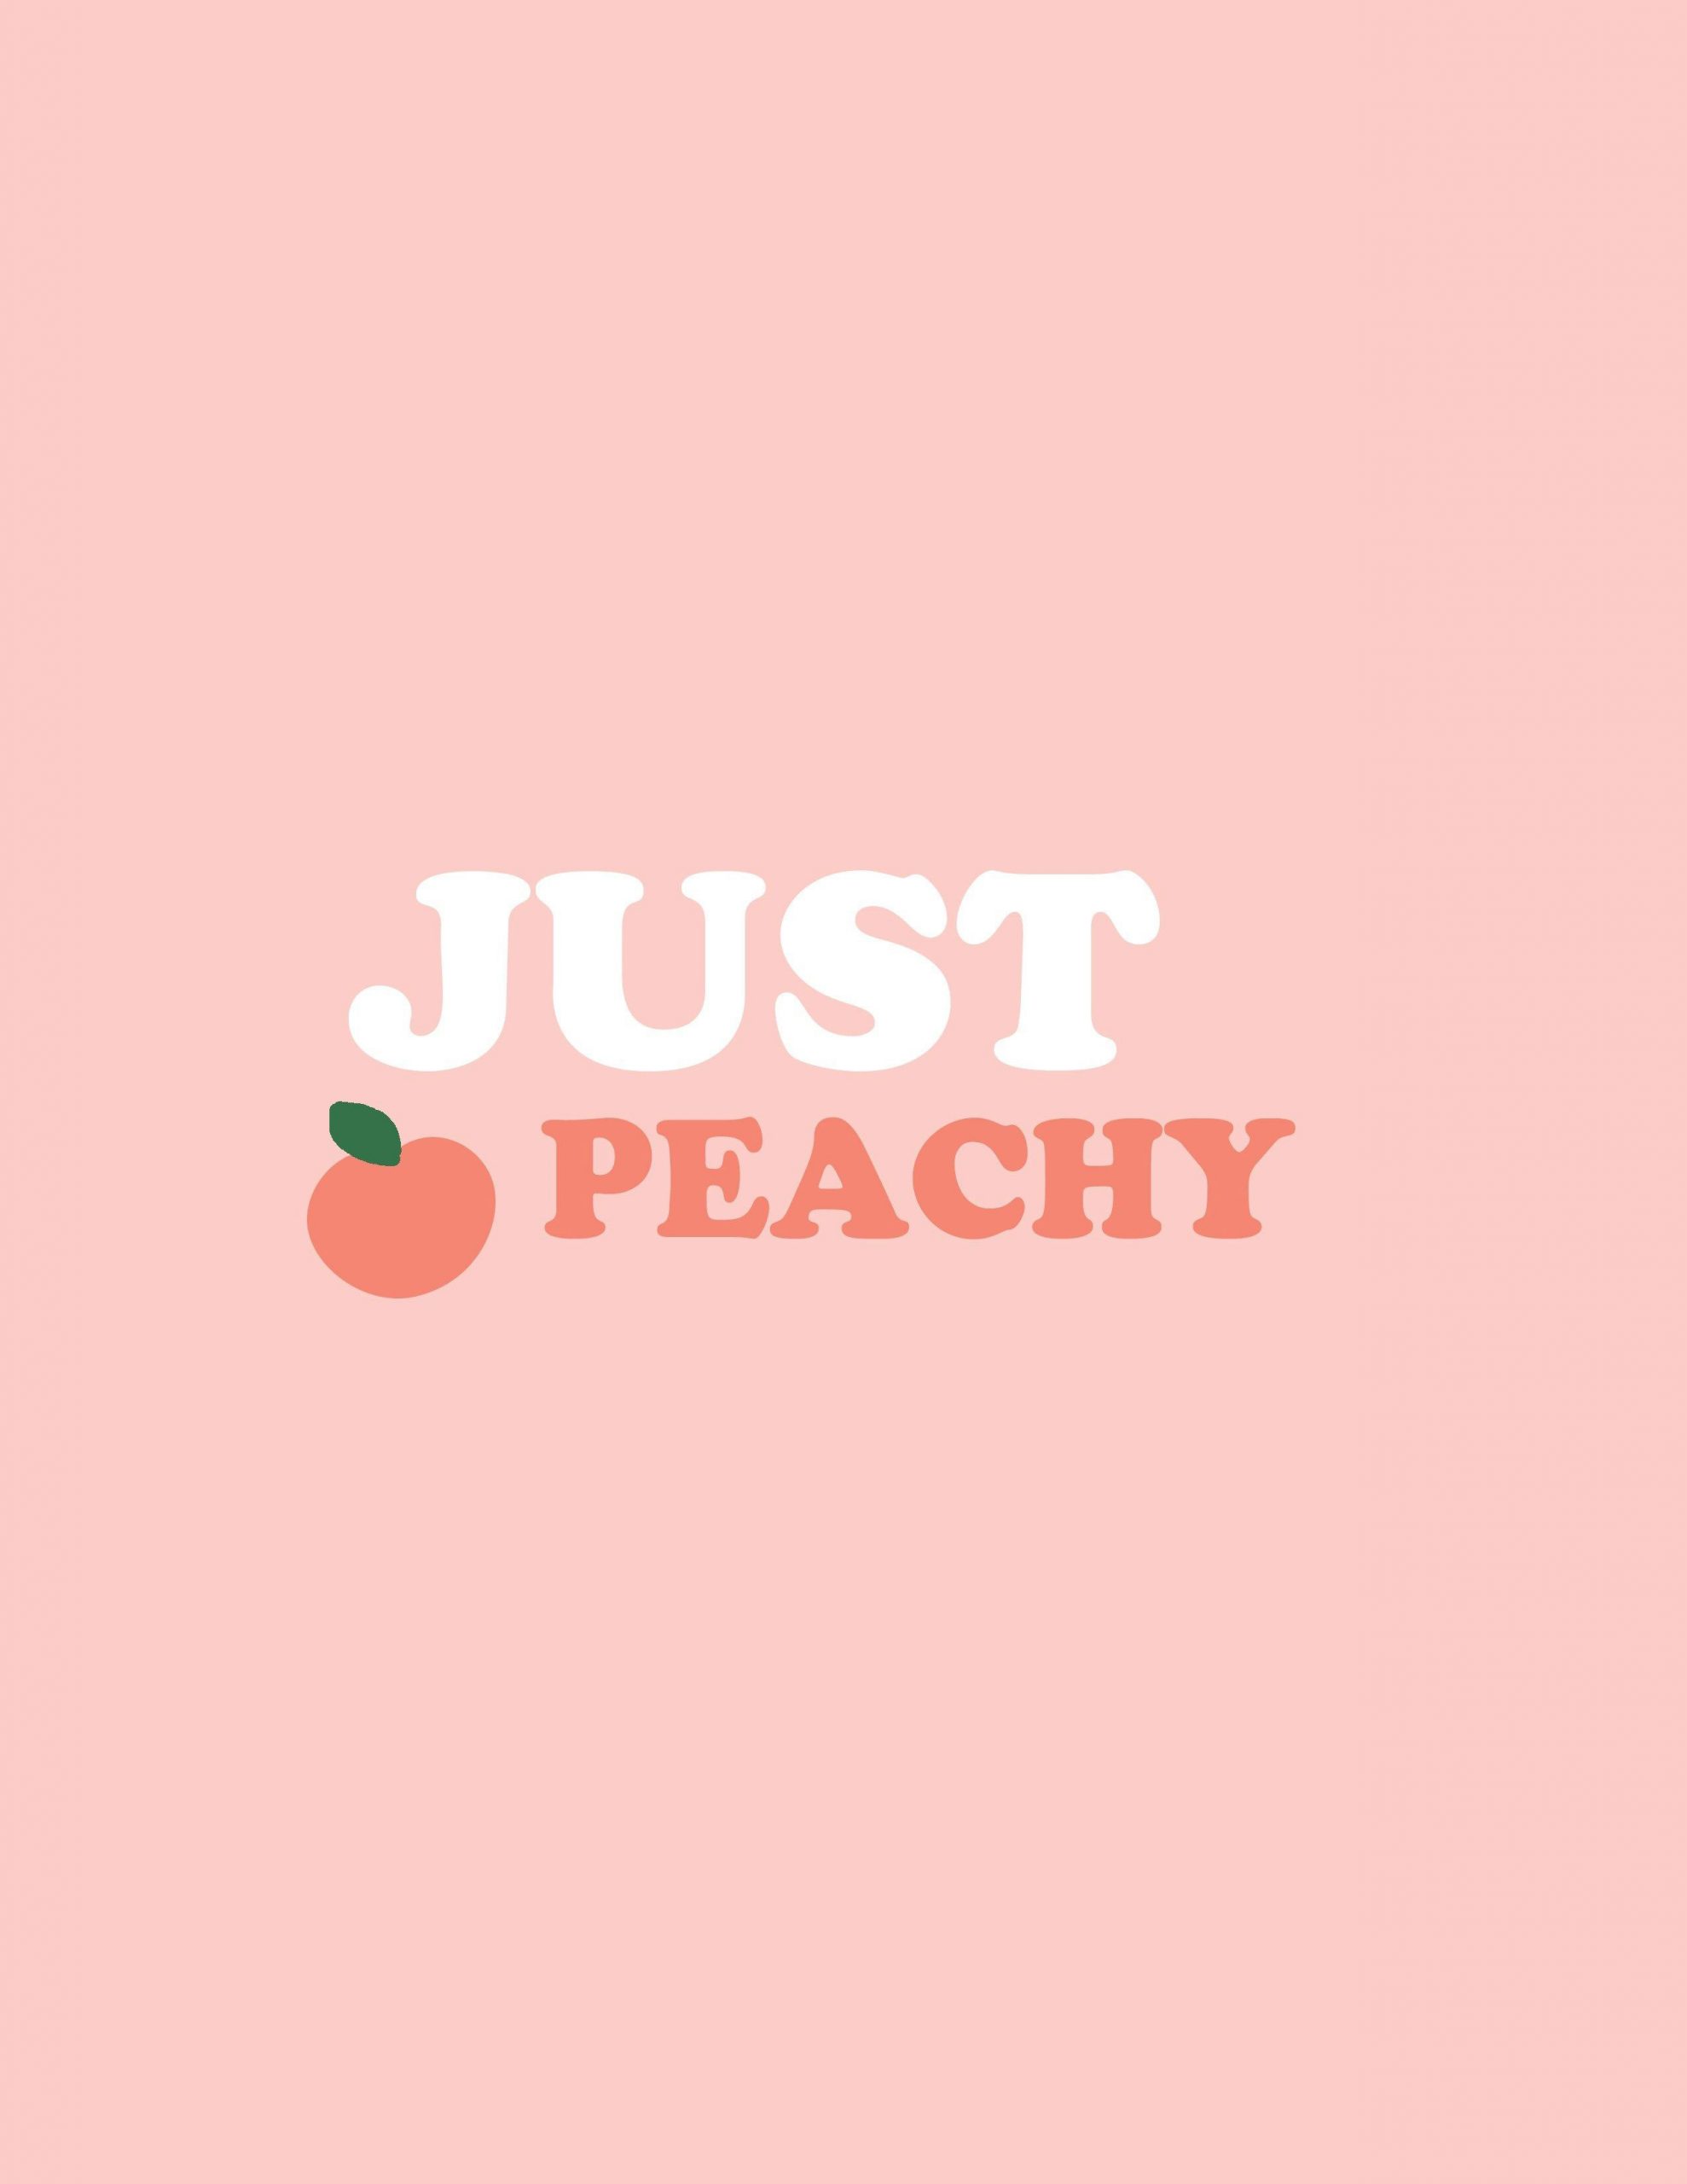 Just Peachy phone background wallpaper for your phone background wallpaper - Princess Peach